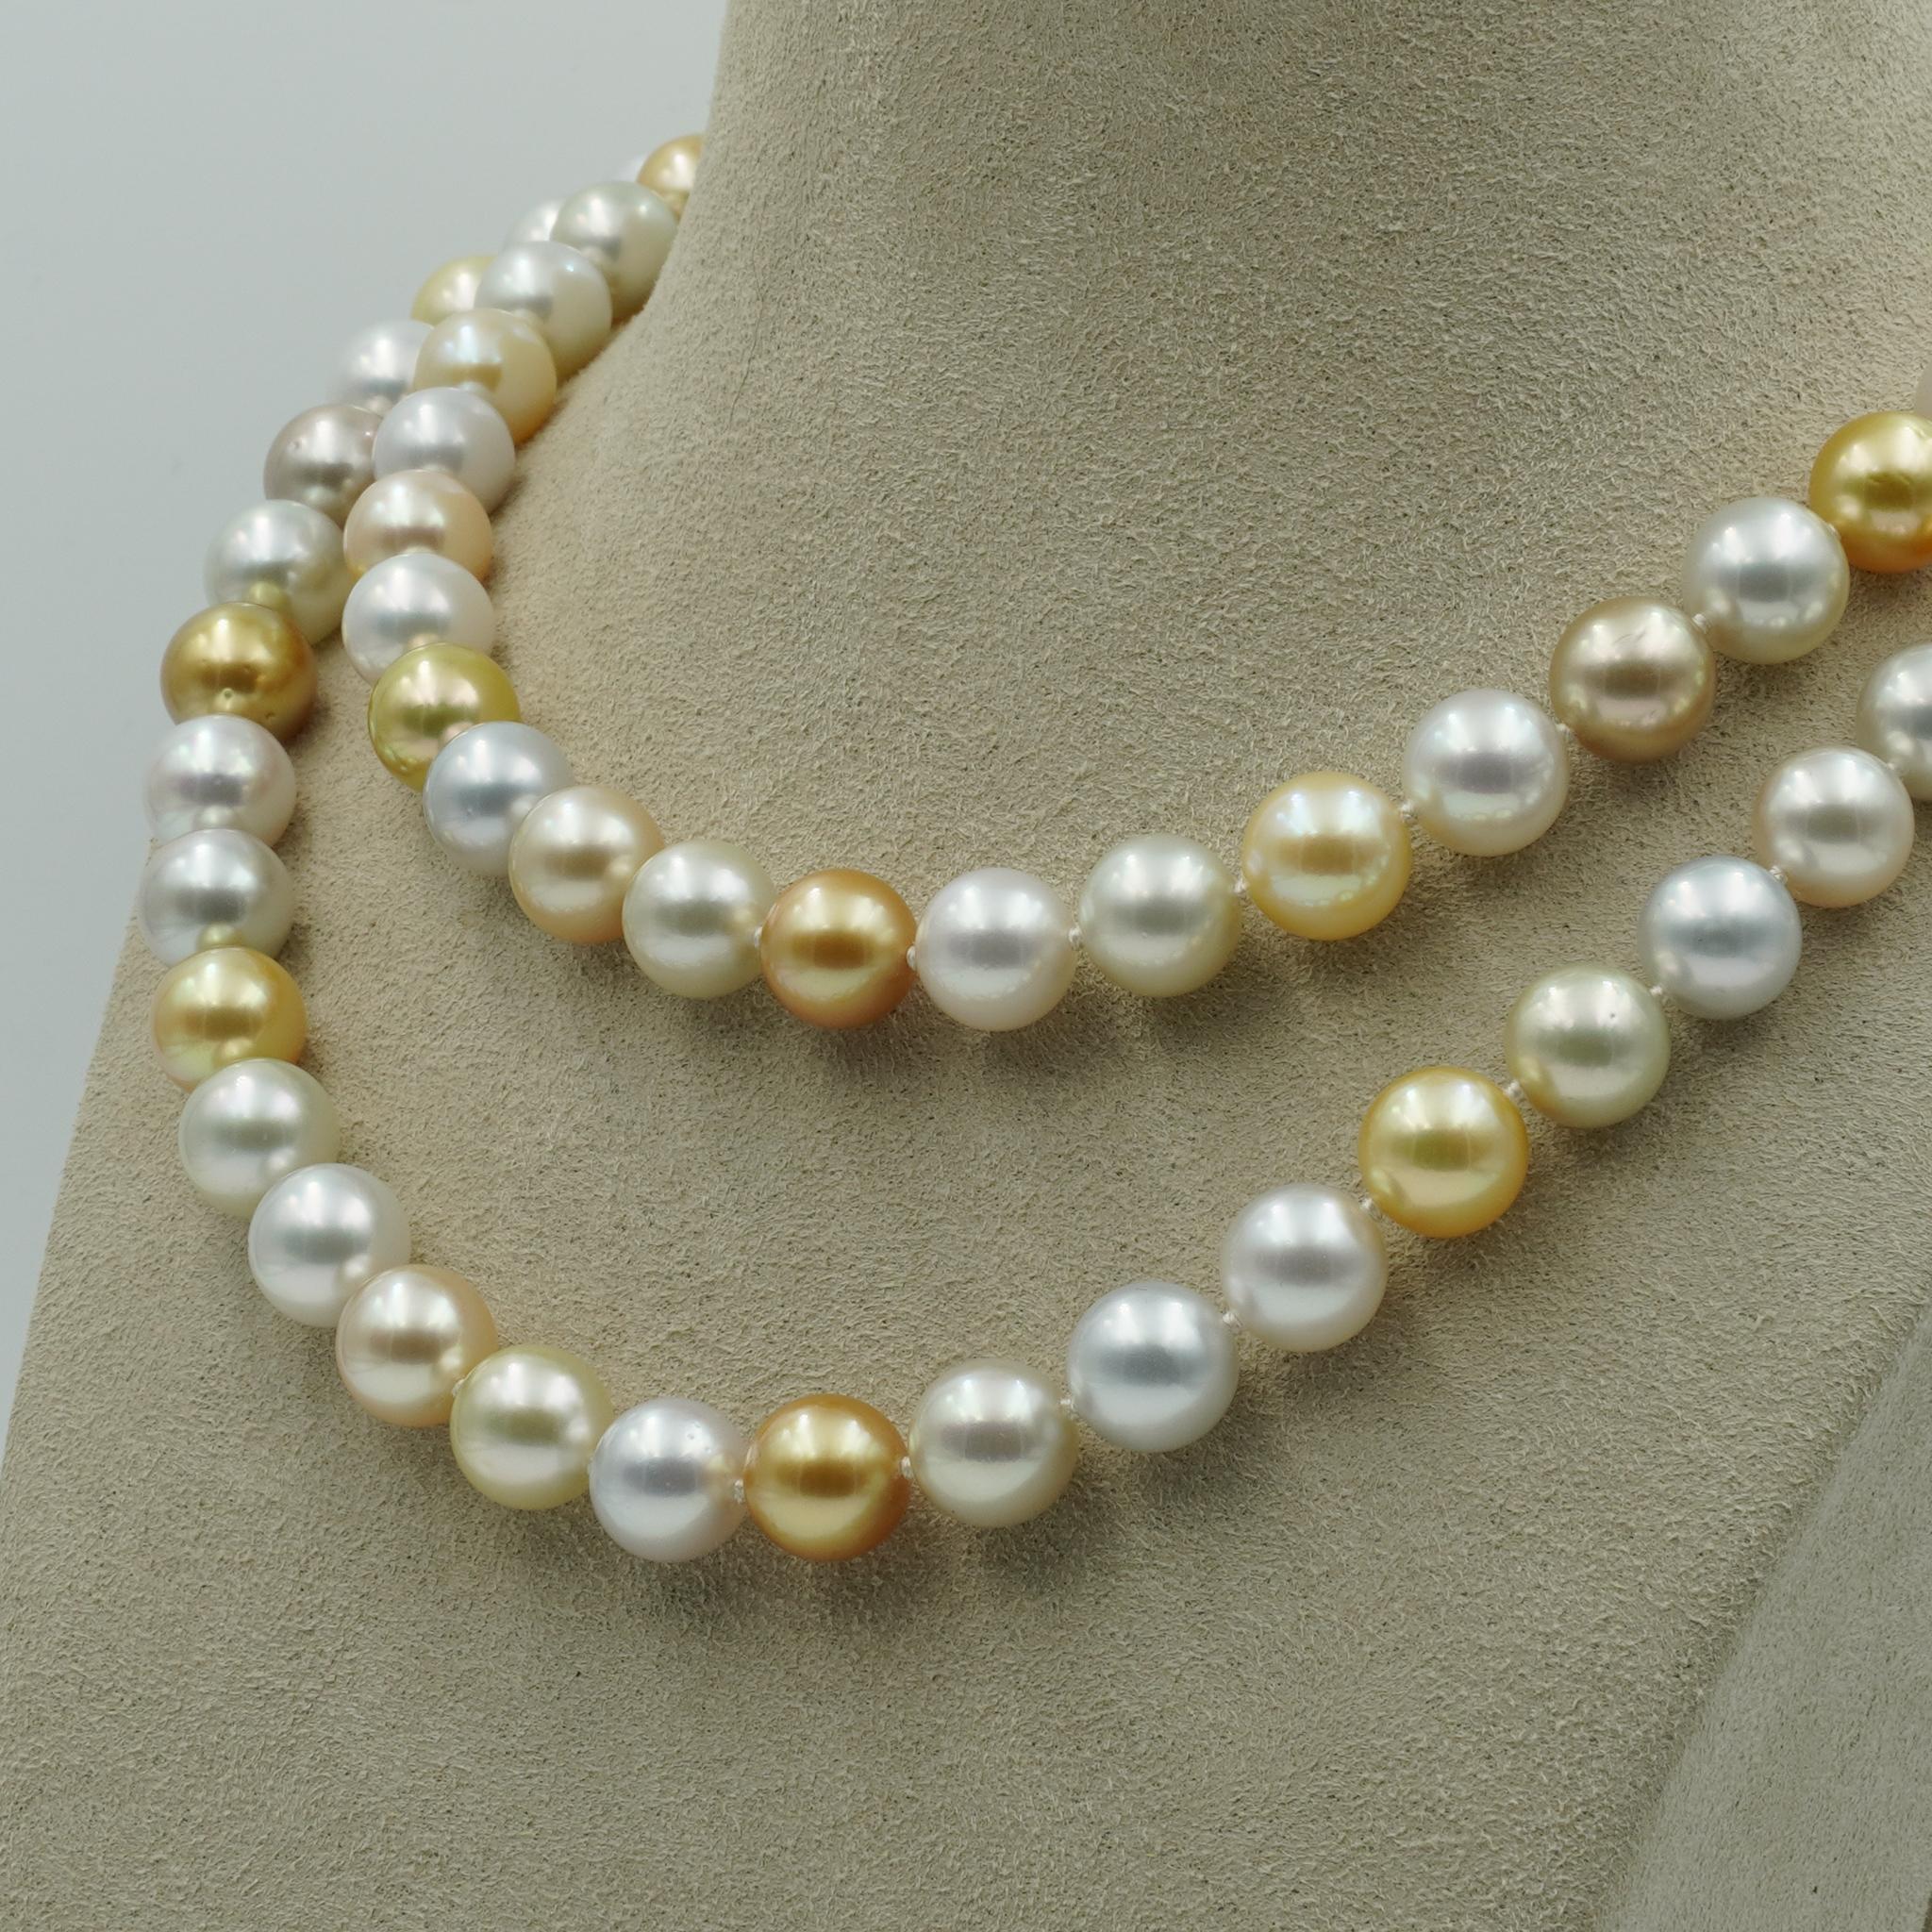 This necklace was made beautifully by Baggins with high-quality pearls that have a gorgeous glow. This necklace features a beautiful combination of golden and white south sea pearls arranged in an alternating pattern and graduate in size. The clasp